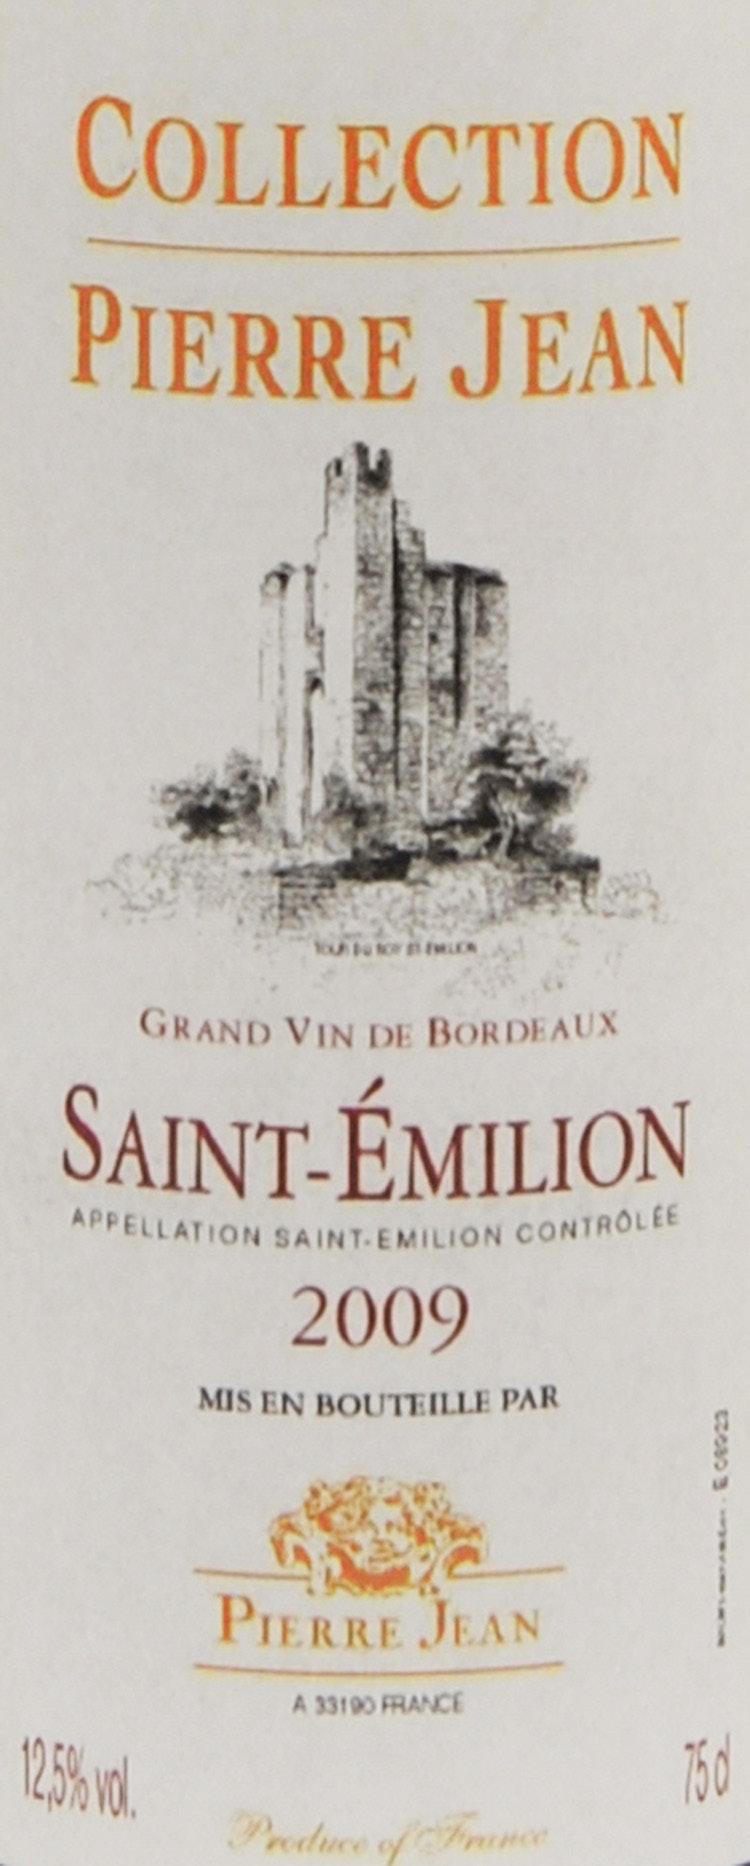 Collection Pierre Jean Saint-Emilion A.O.C. Saint-Emilion, Bordeaux 2009 Collection Pierre Jean Saint-Emilion - Visual: Beautiful cherry-red color.